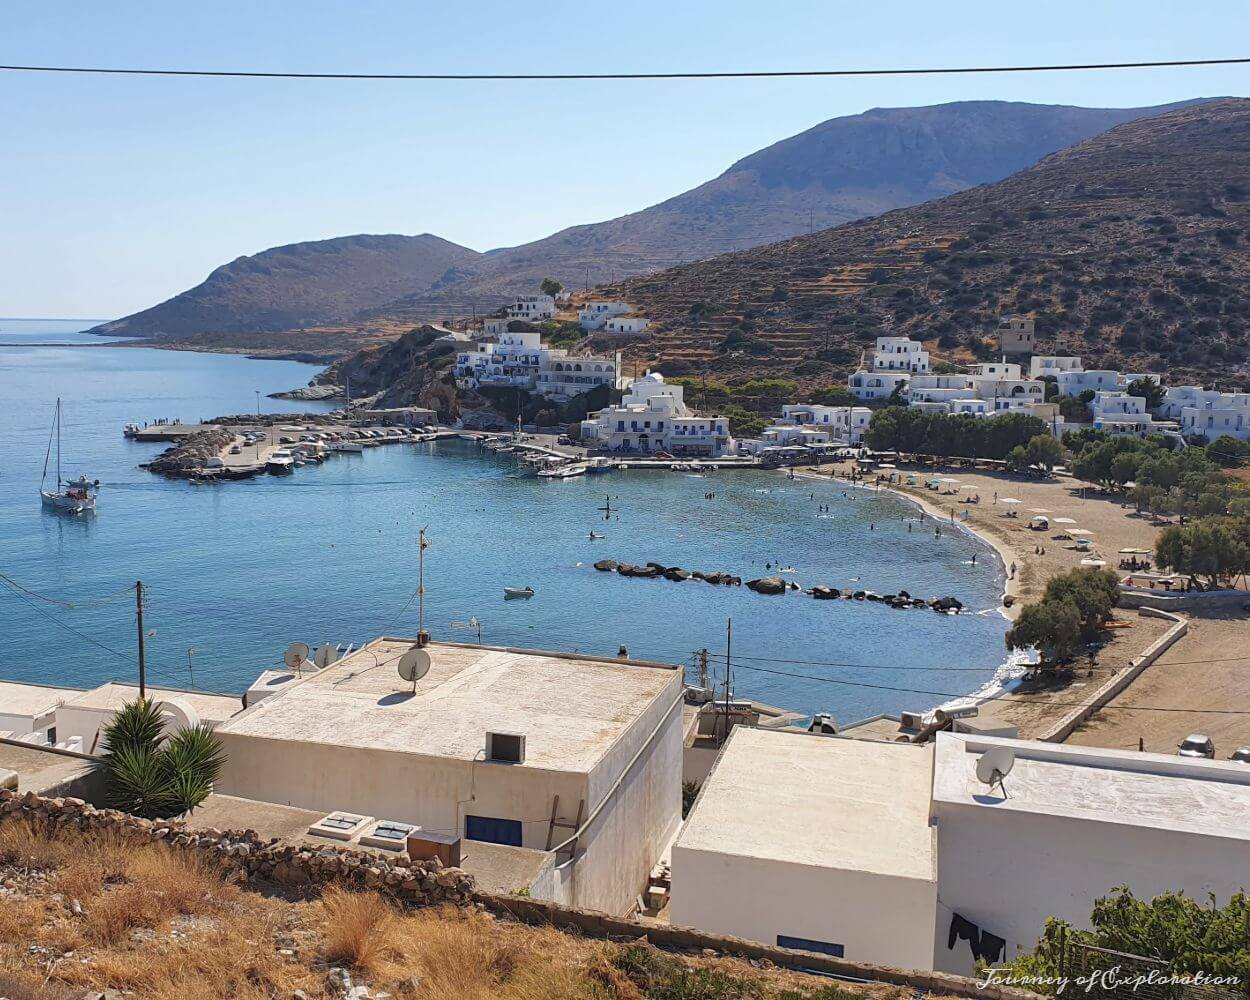 View of port of Alopronia